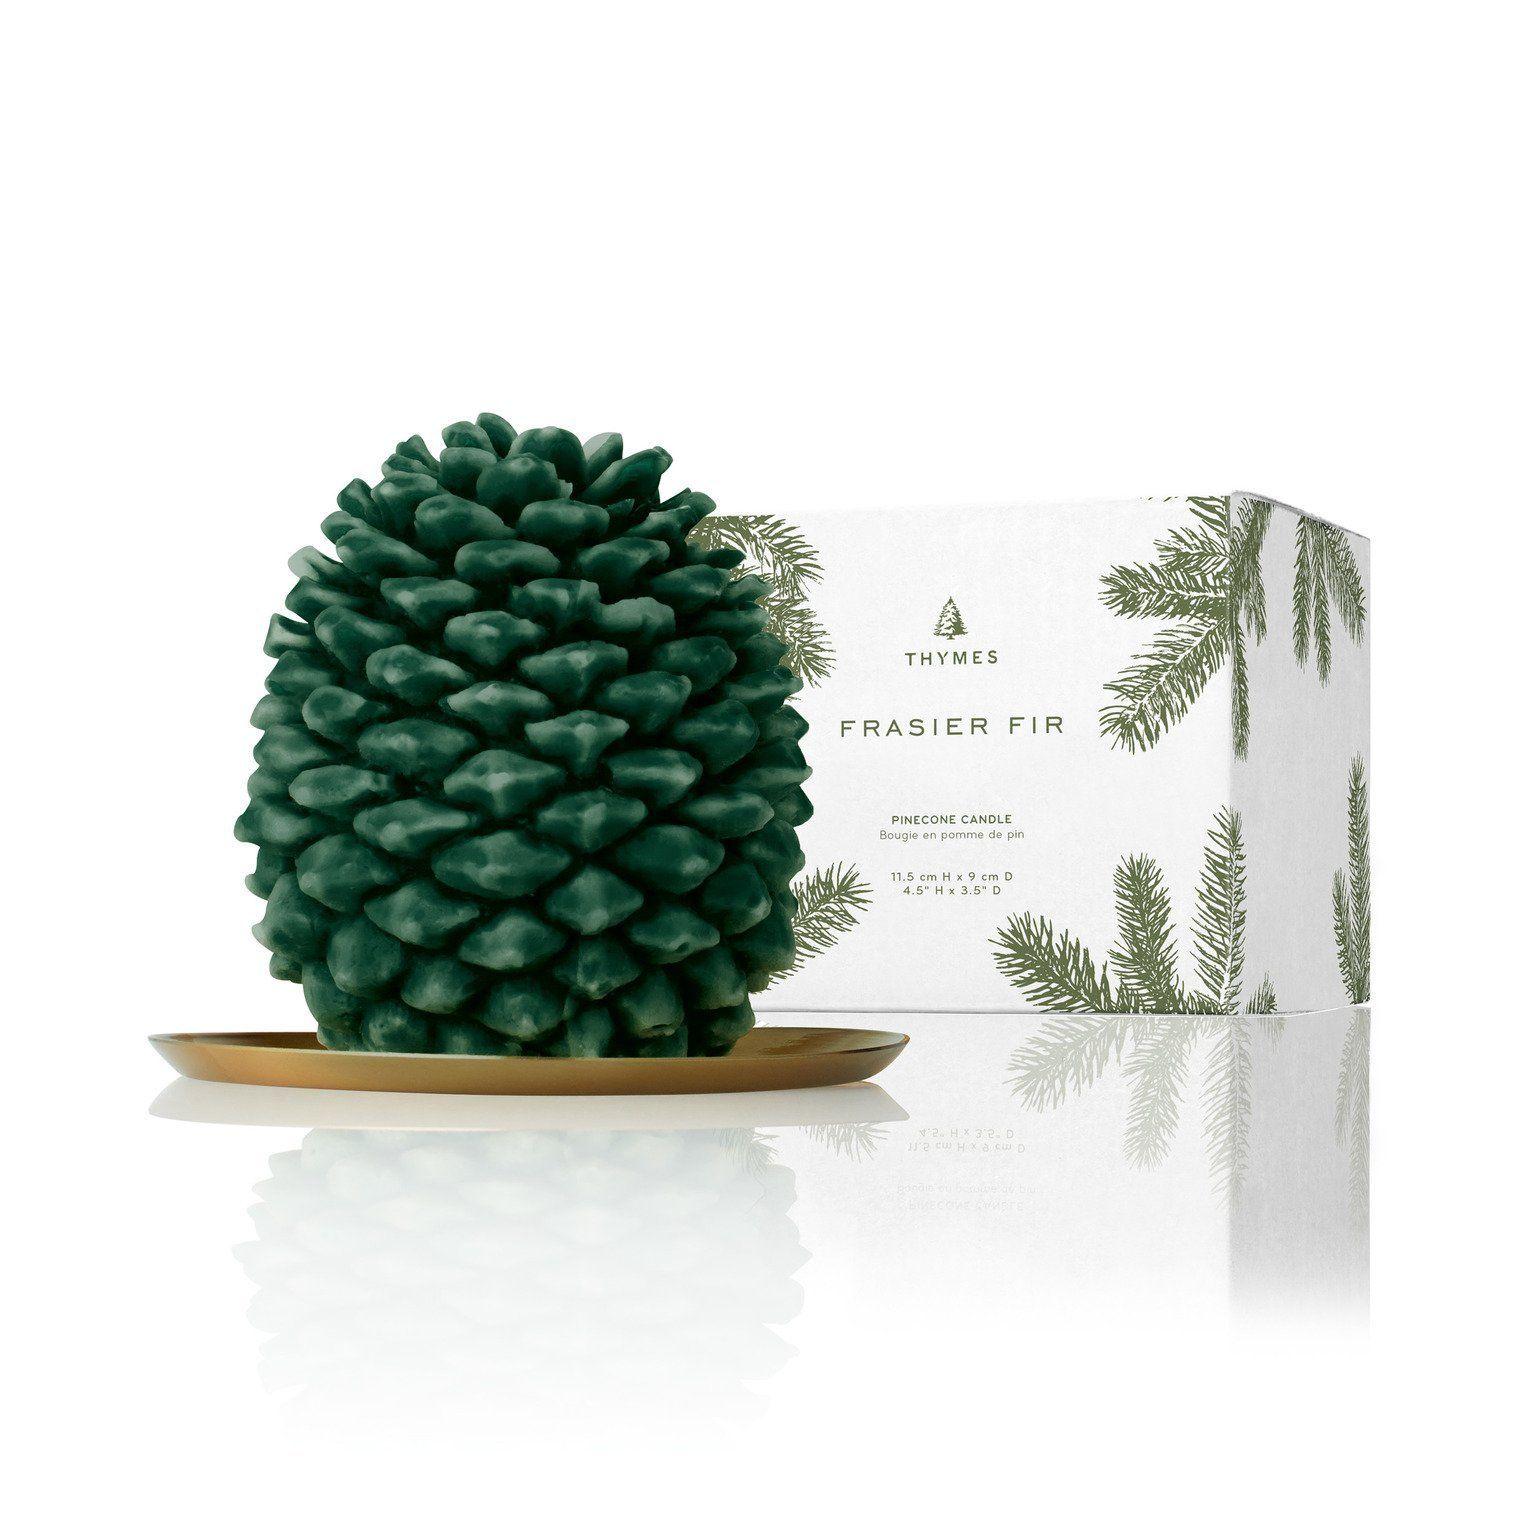 This exquisitely designed candle captures the essence of a winter forest and fills your space with the invigorating scent of Frasier Fir. The molded pinecone shape not only enhances your décor with a touch of nature but also adds a festive element to your home.